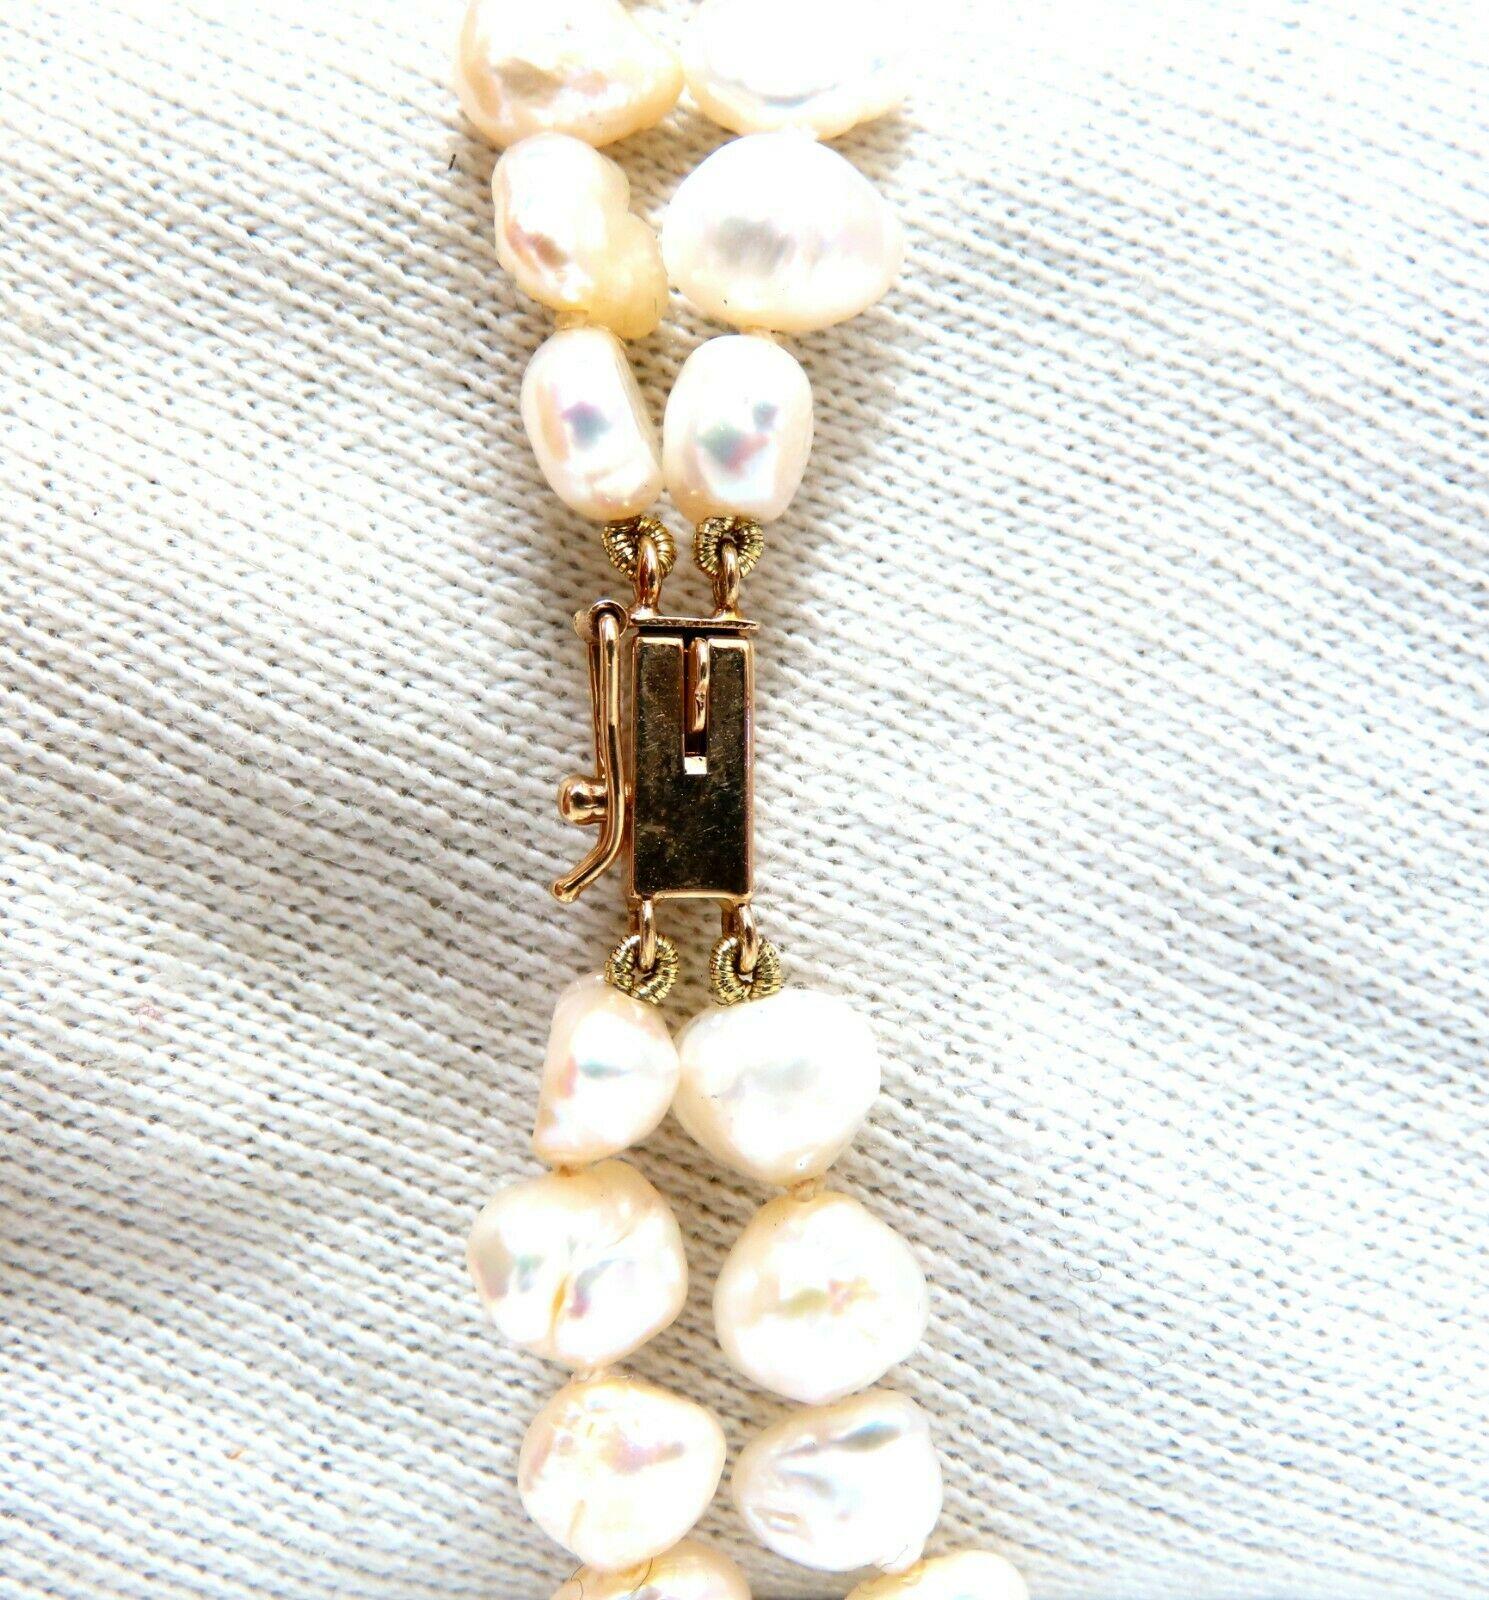 21 x 14mm Pear Shaped Mabe Pearl necklace.

Double stranded 6.5mm fresh water beads.

Center Pendant: 47 x 27mm

With 14kt. yellow gold clasp

Necklace: 16 inches long.

clasp: 7x 3mm clasp